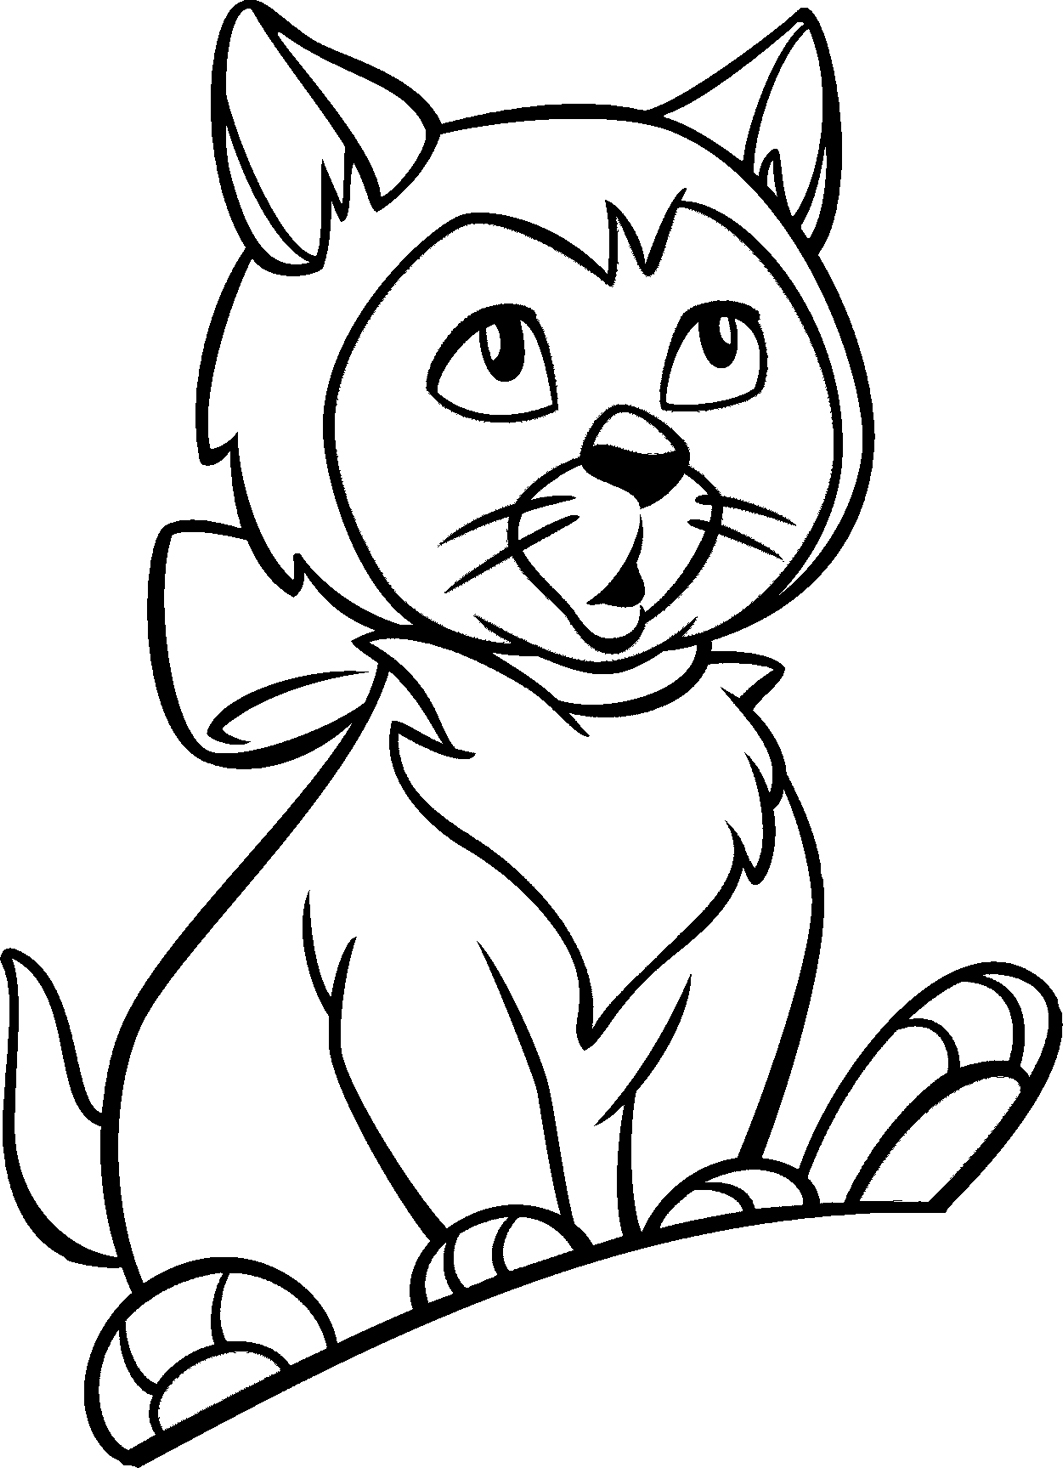  Coloring  Pages  for Kids  Cat  Coloring  Pages  for Kids 